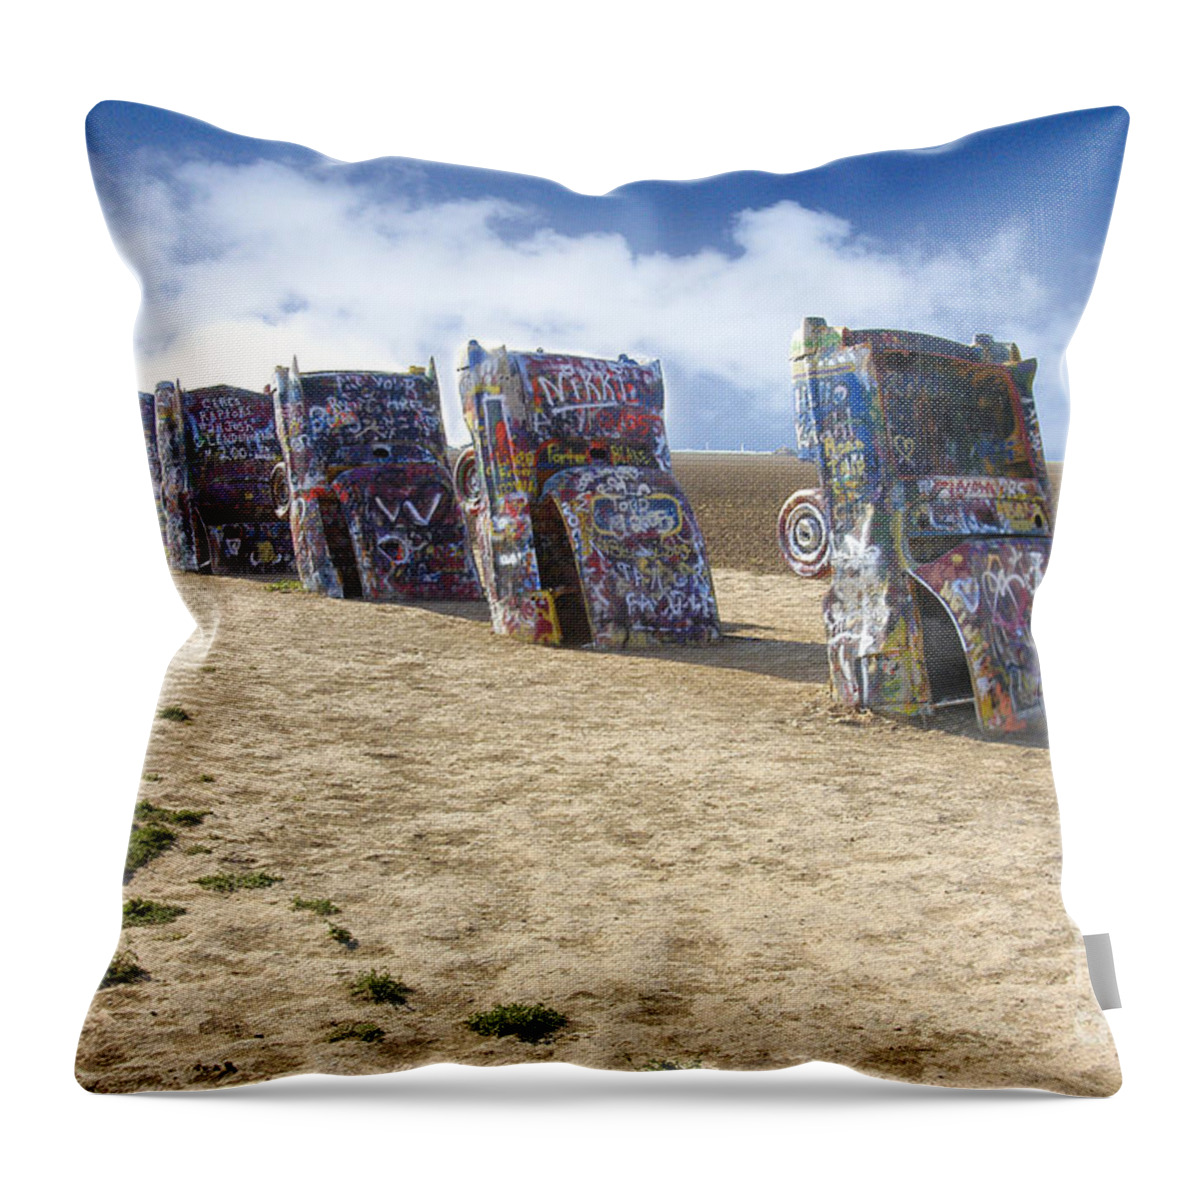 Cadillac Ranch Is A Public Art Installation And Sculpture In Amarillo Throw Pillow featuring the photograph Cadillac Ranch by Greg Kopriva